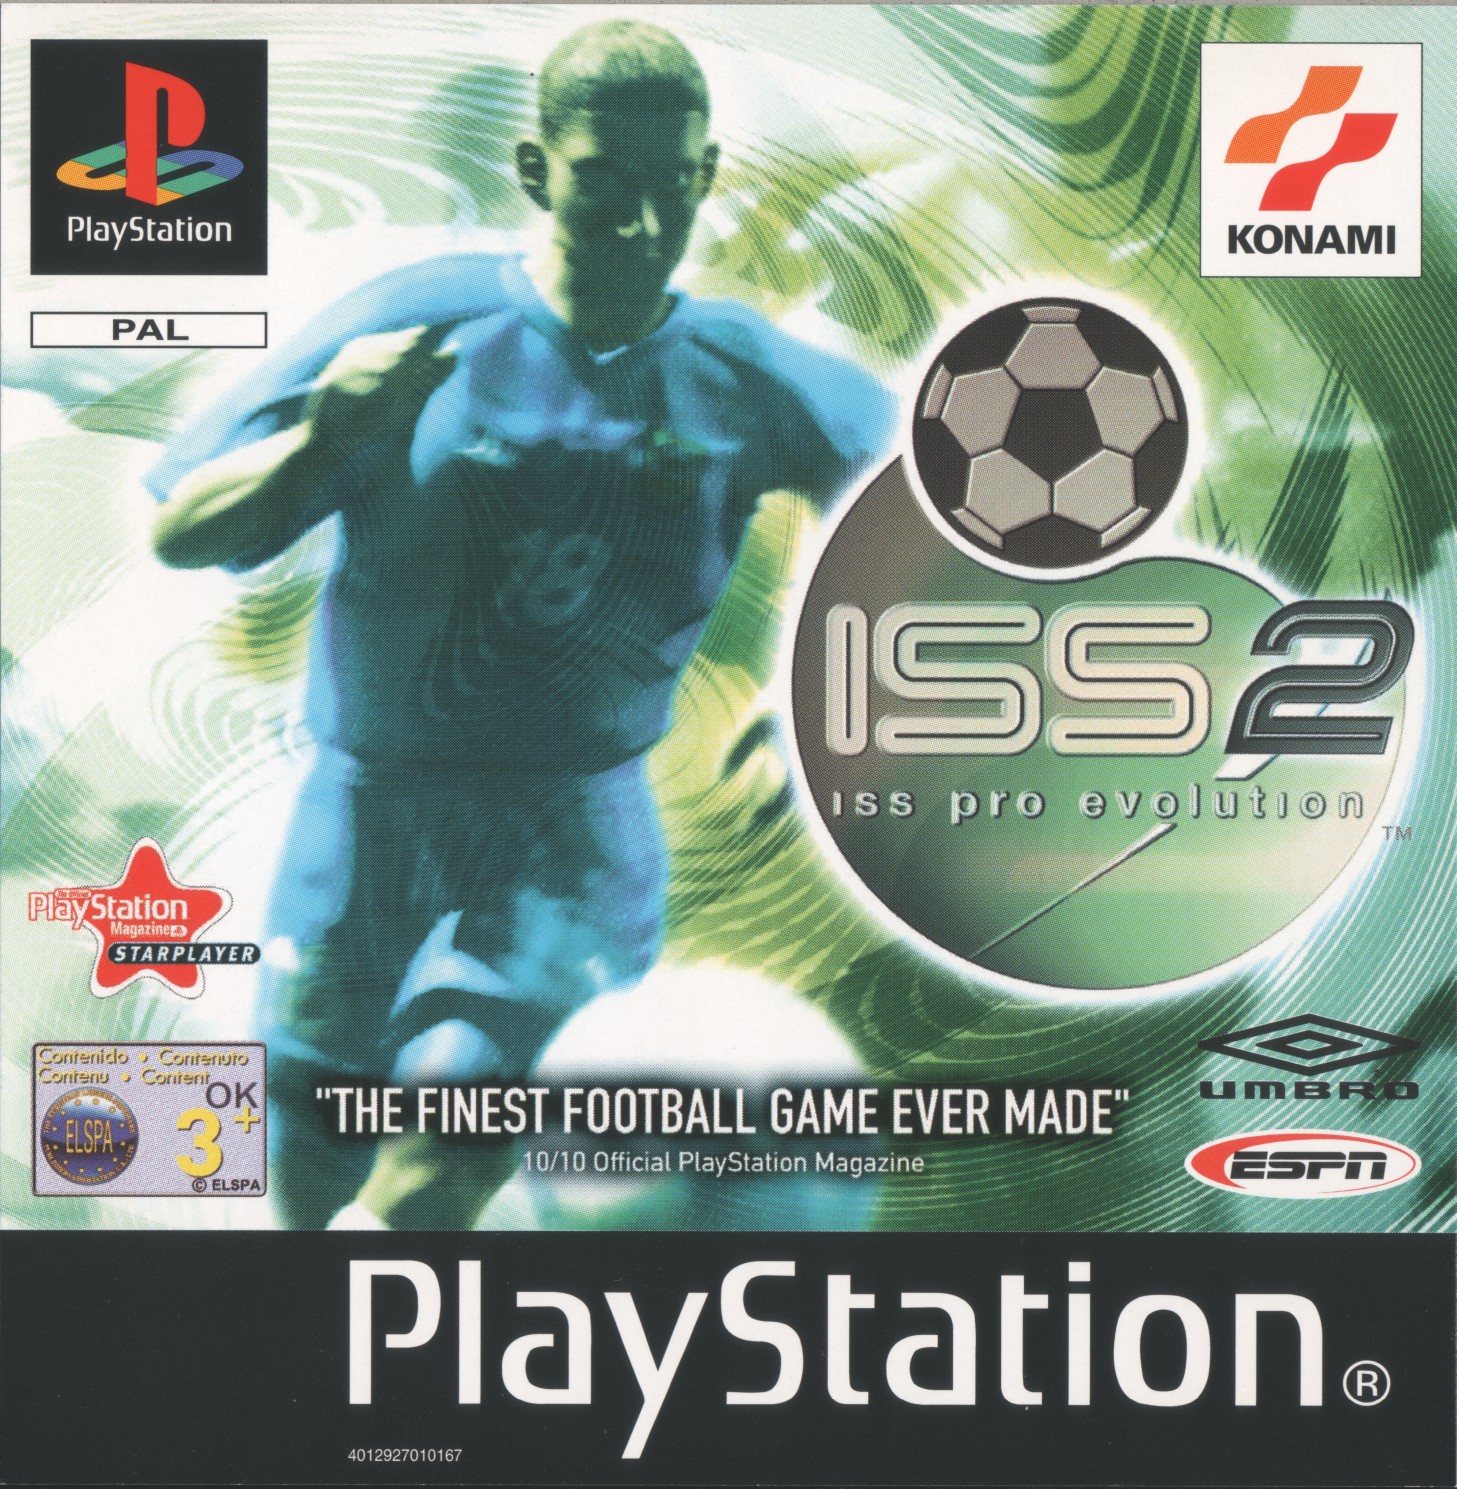 ISS Pro Evolution 2 PSX cover